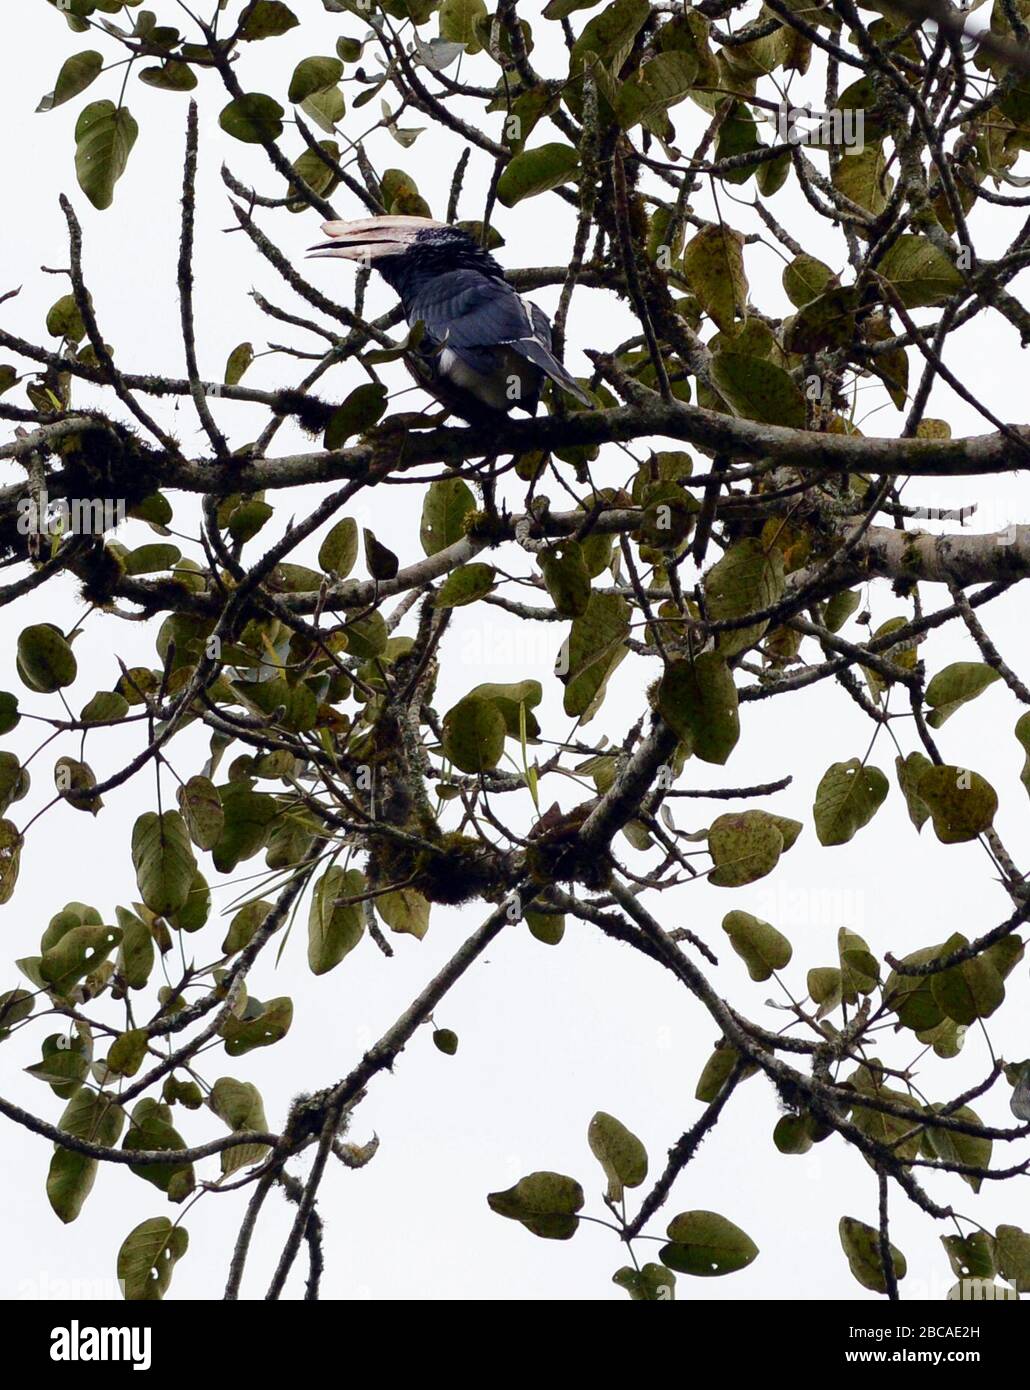 Silvery-cheeked hornbill in Ethiopia. Stock Photo